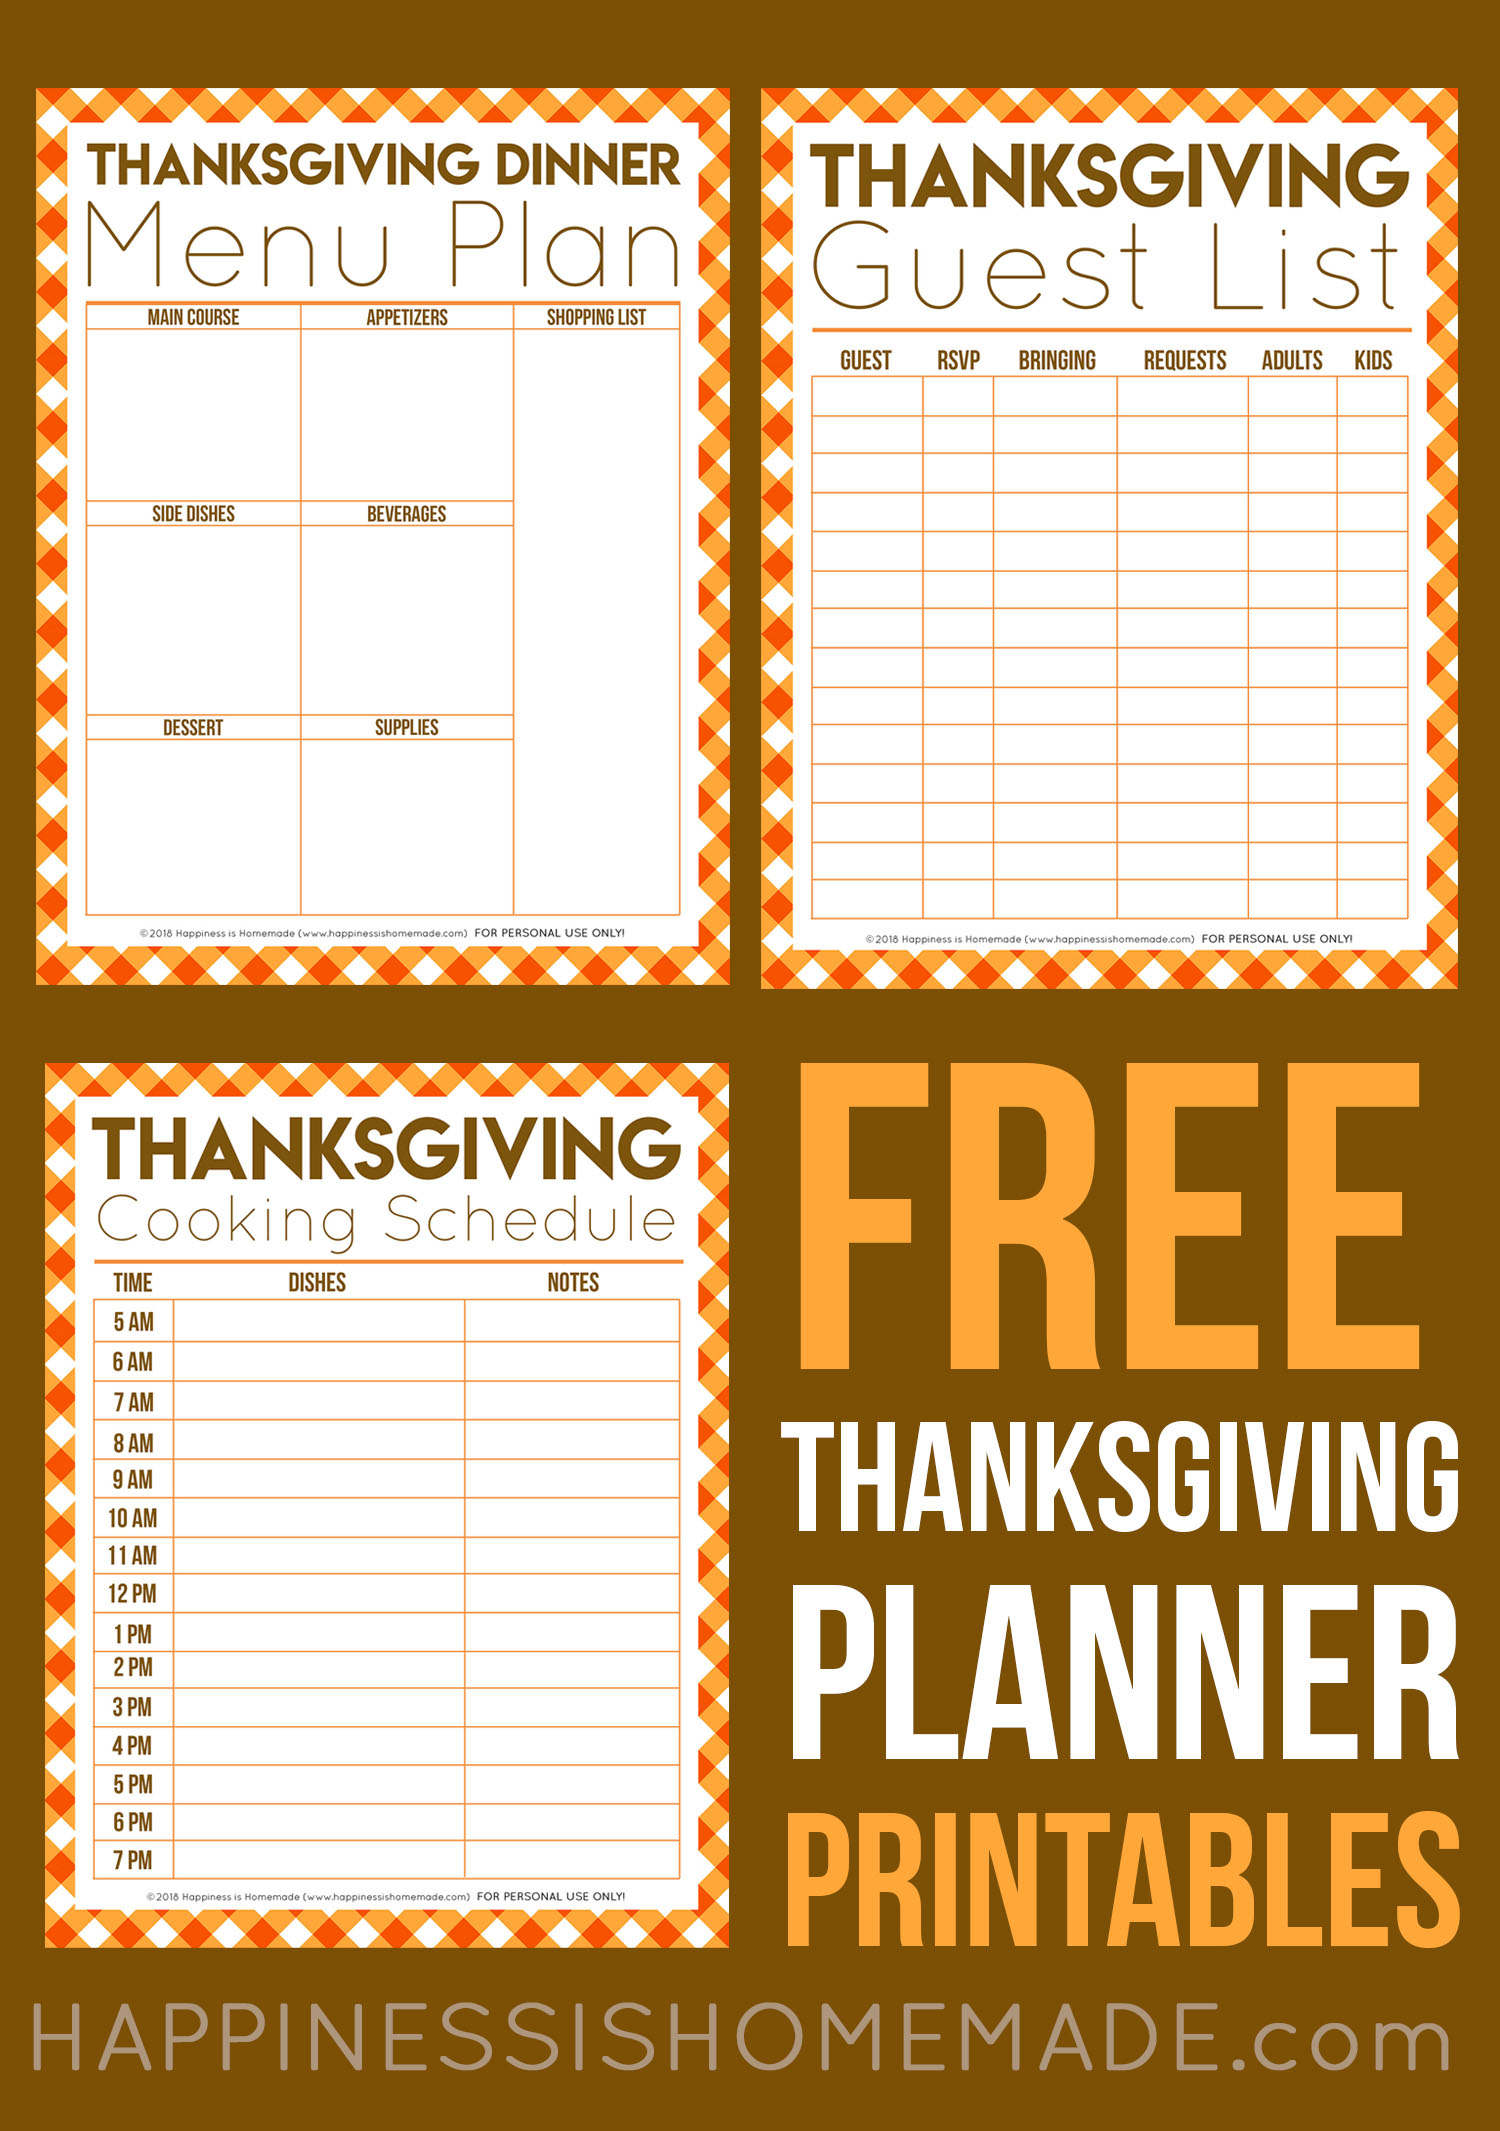 Free Printable Thanksgiving Meal Thanksgiving Planner Web Download Or